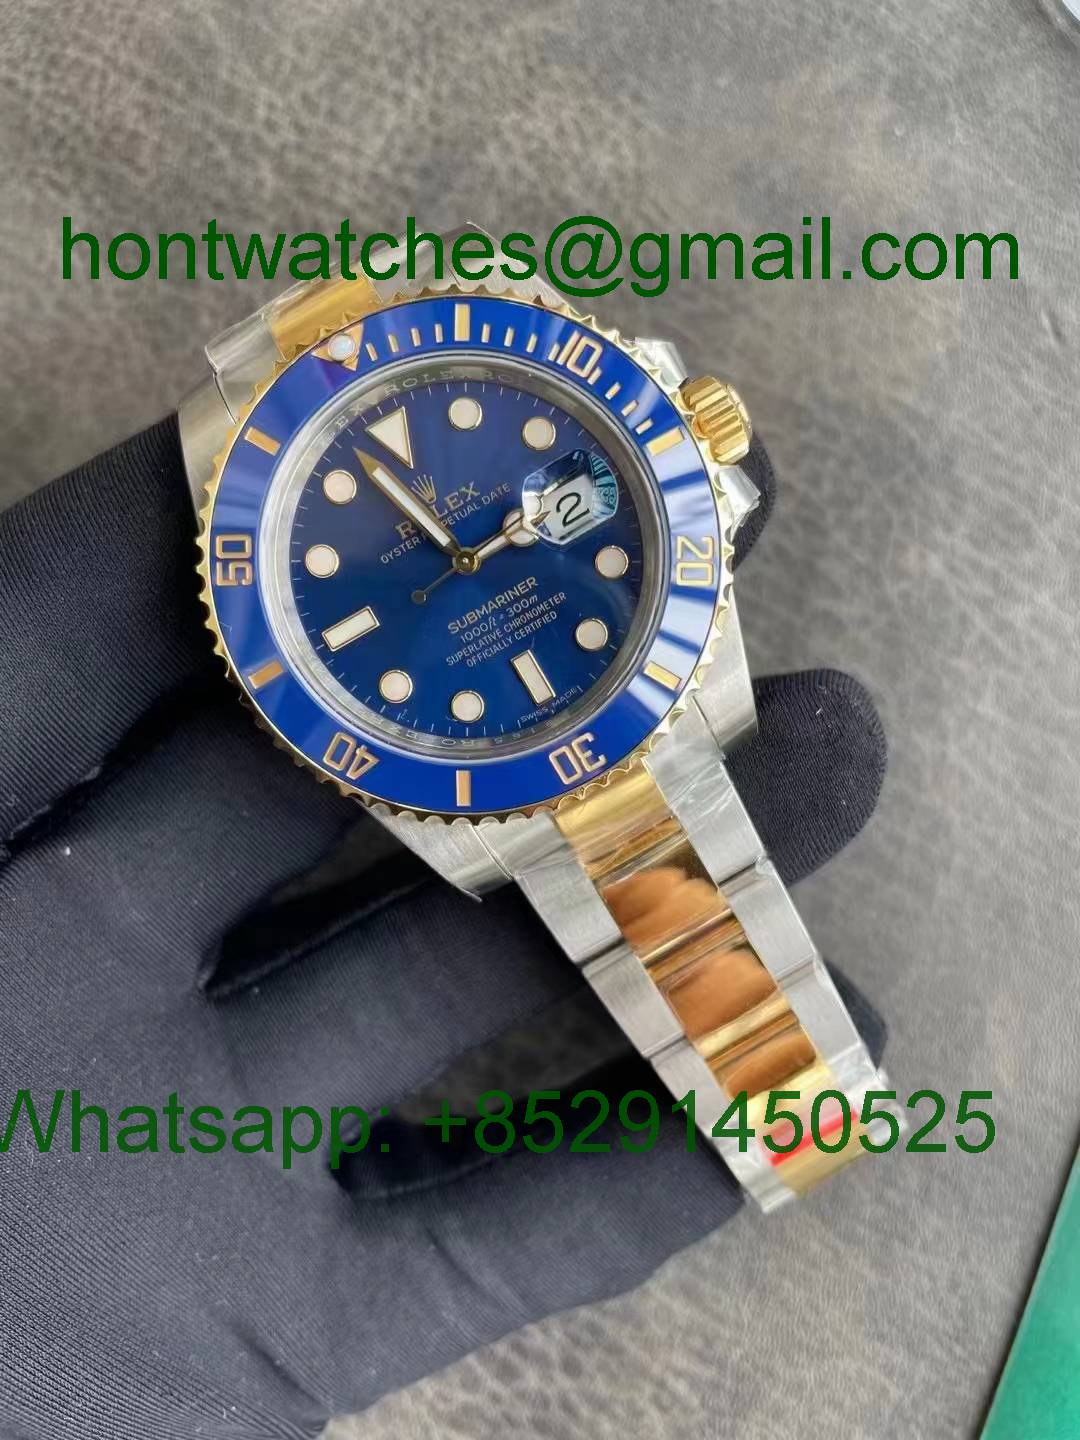 Replica Rolex Submariner 116613LB 904L Gold Steel VSF 1:1 Best Blue Dial VS3135 - Hontwatch Wholesale